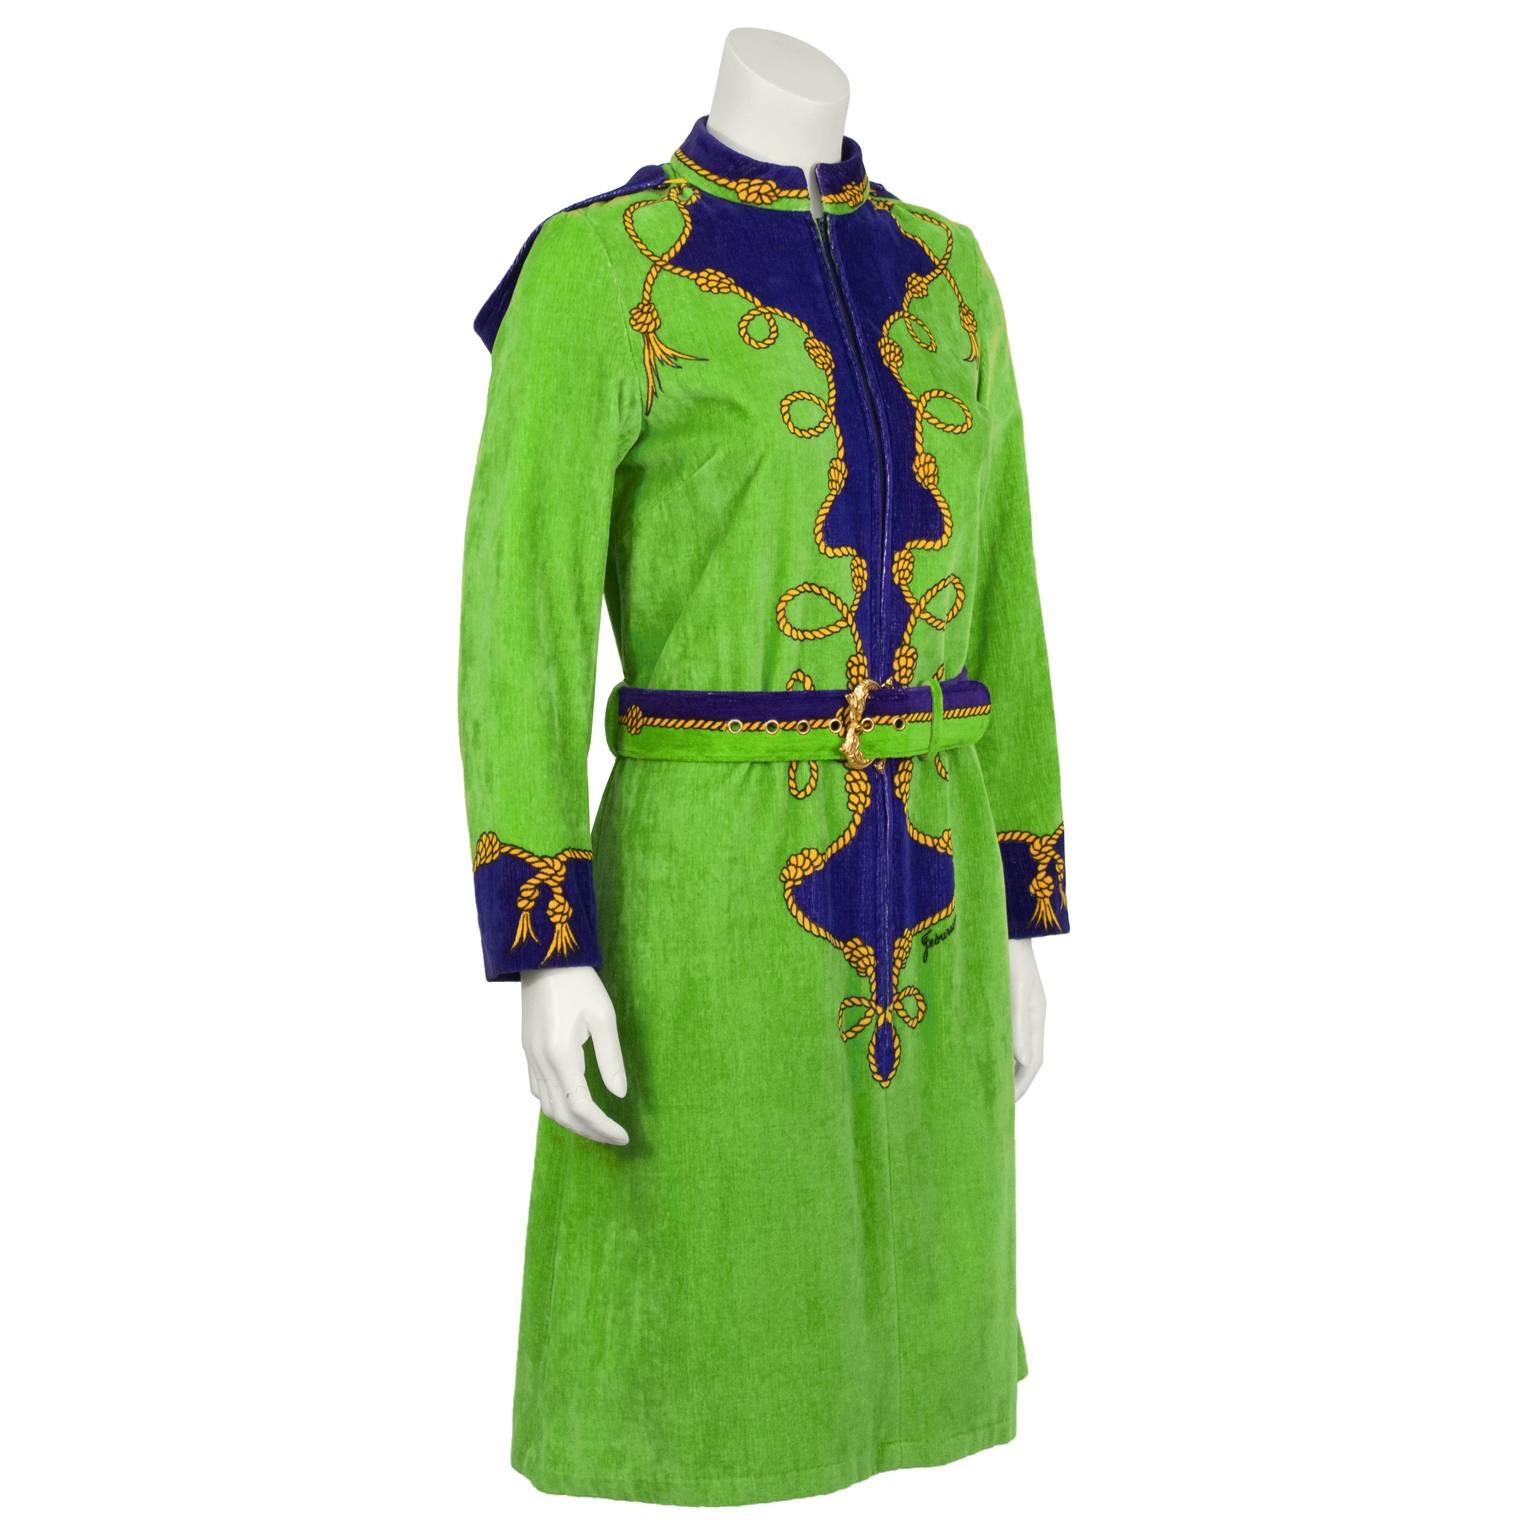 This 1960’s creation from the Venetian textile company Jesurum, is the perfect cover-up for the pool. The hooded terrycloth dress features a tromp l’oeil design of gold rope with navy detail on a Kelly green background.  Zip front  finishes in a